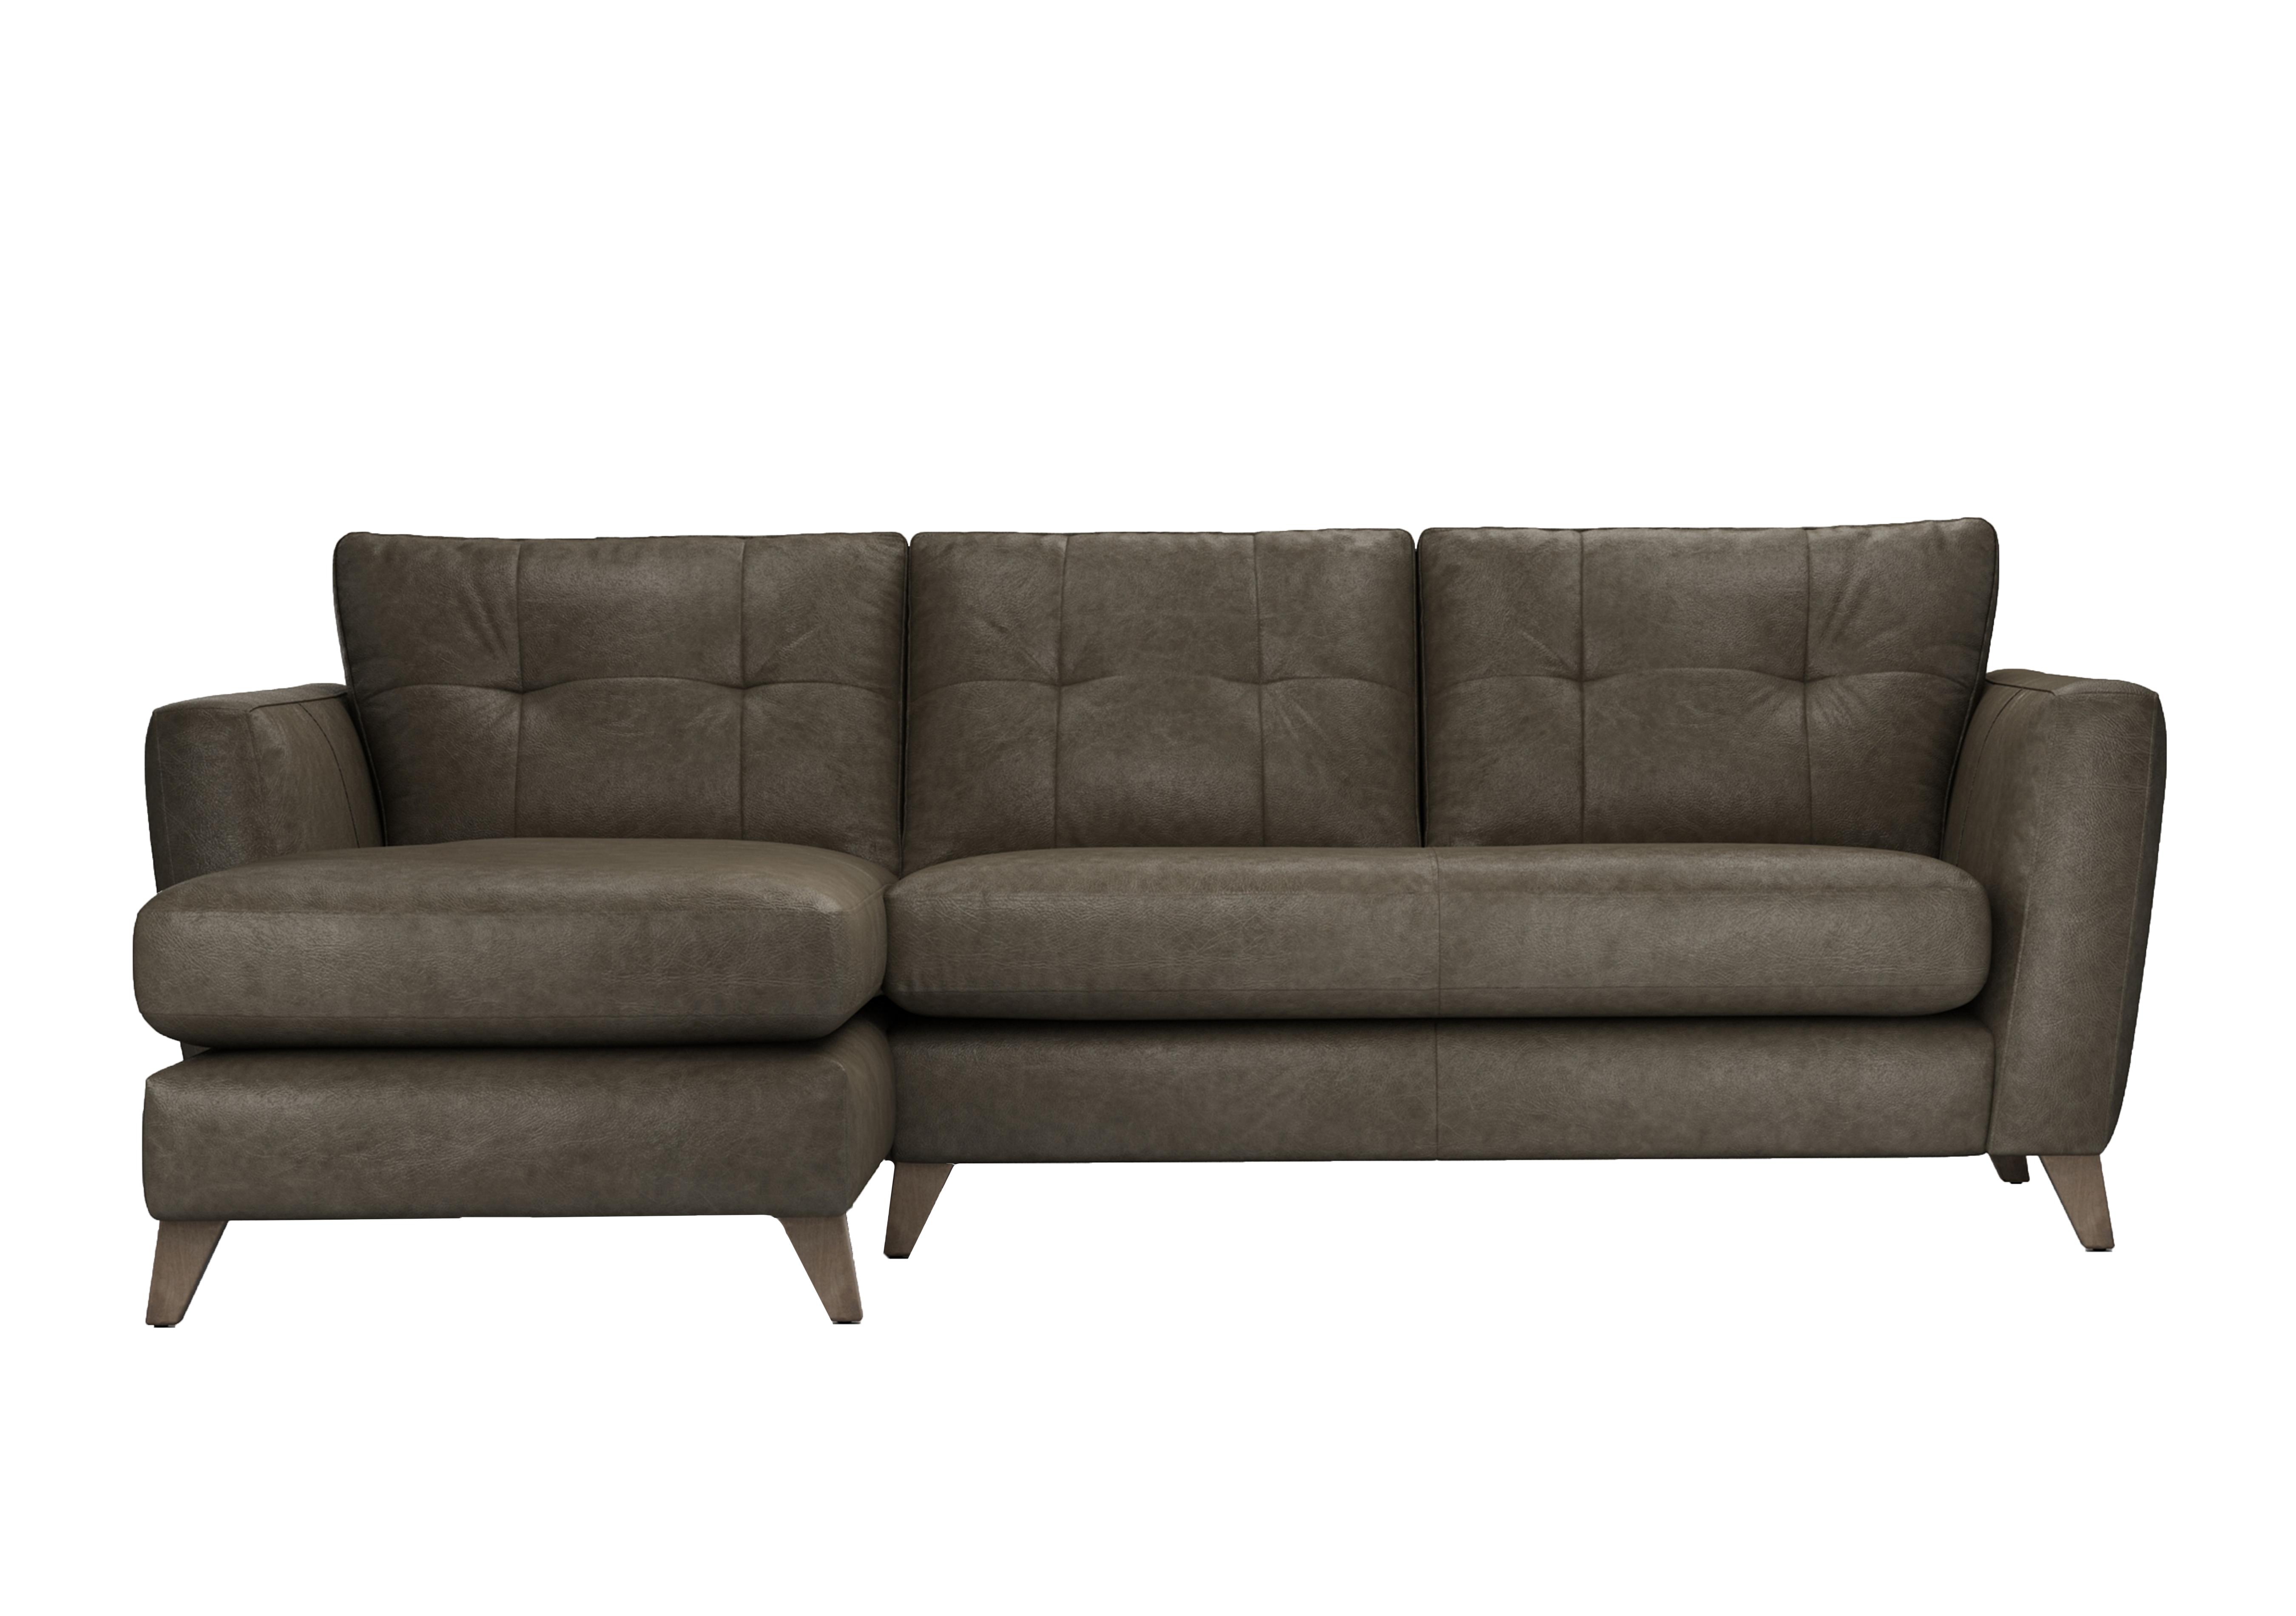 Hermione Leather Corner Sofa with Chaise End in Gra189 Granite Wo Ft on Furniture Village